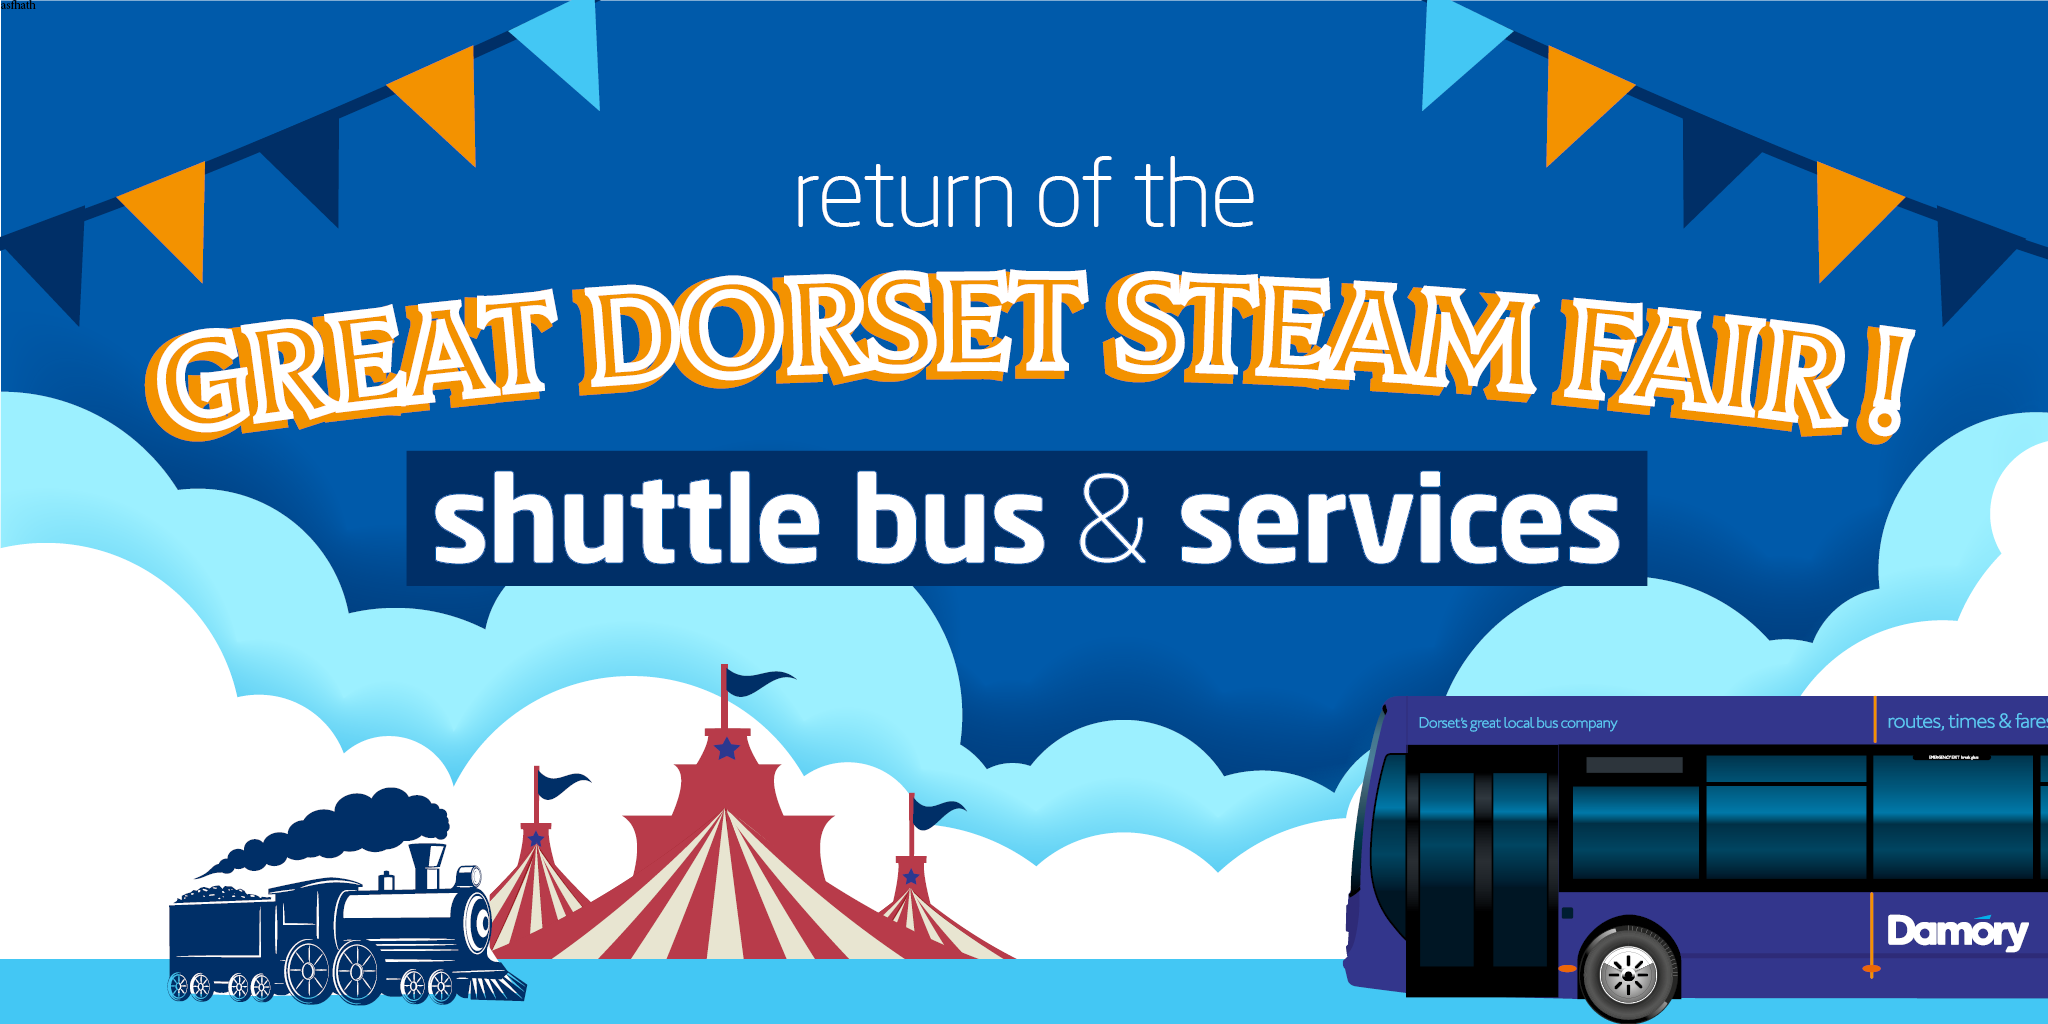 The Great Dorset Steam Fair travel with us morebus